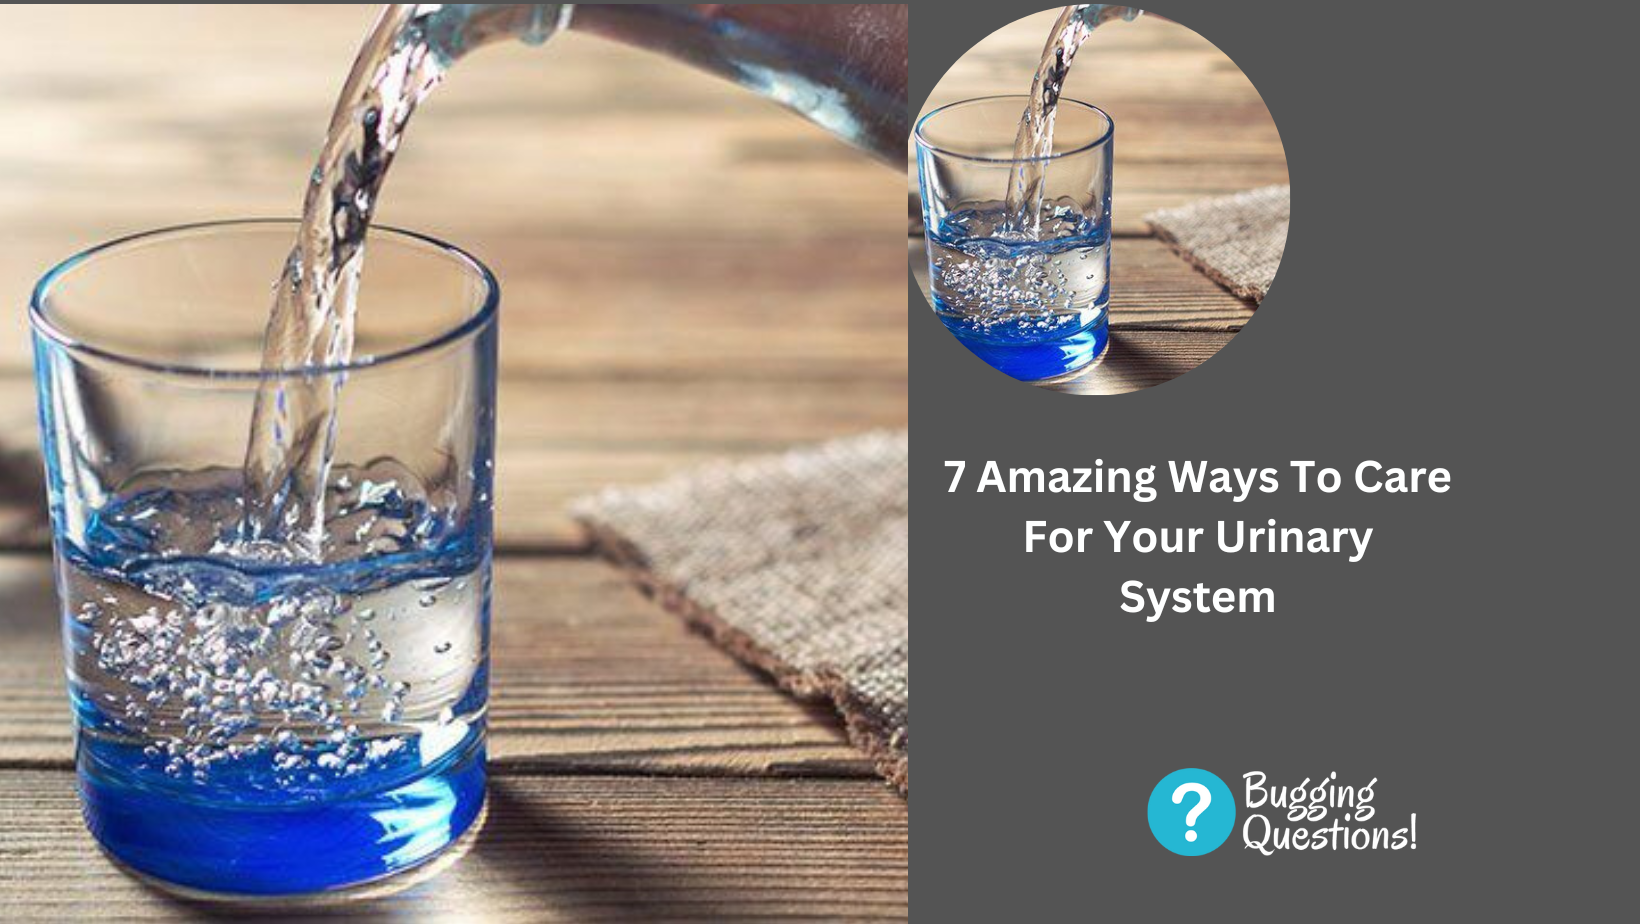 7 Amazing Ways To Care For Your Urinary System